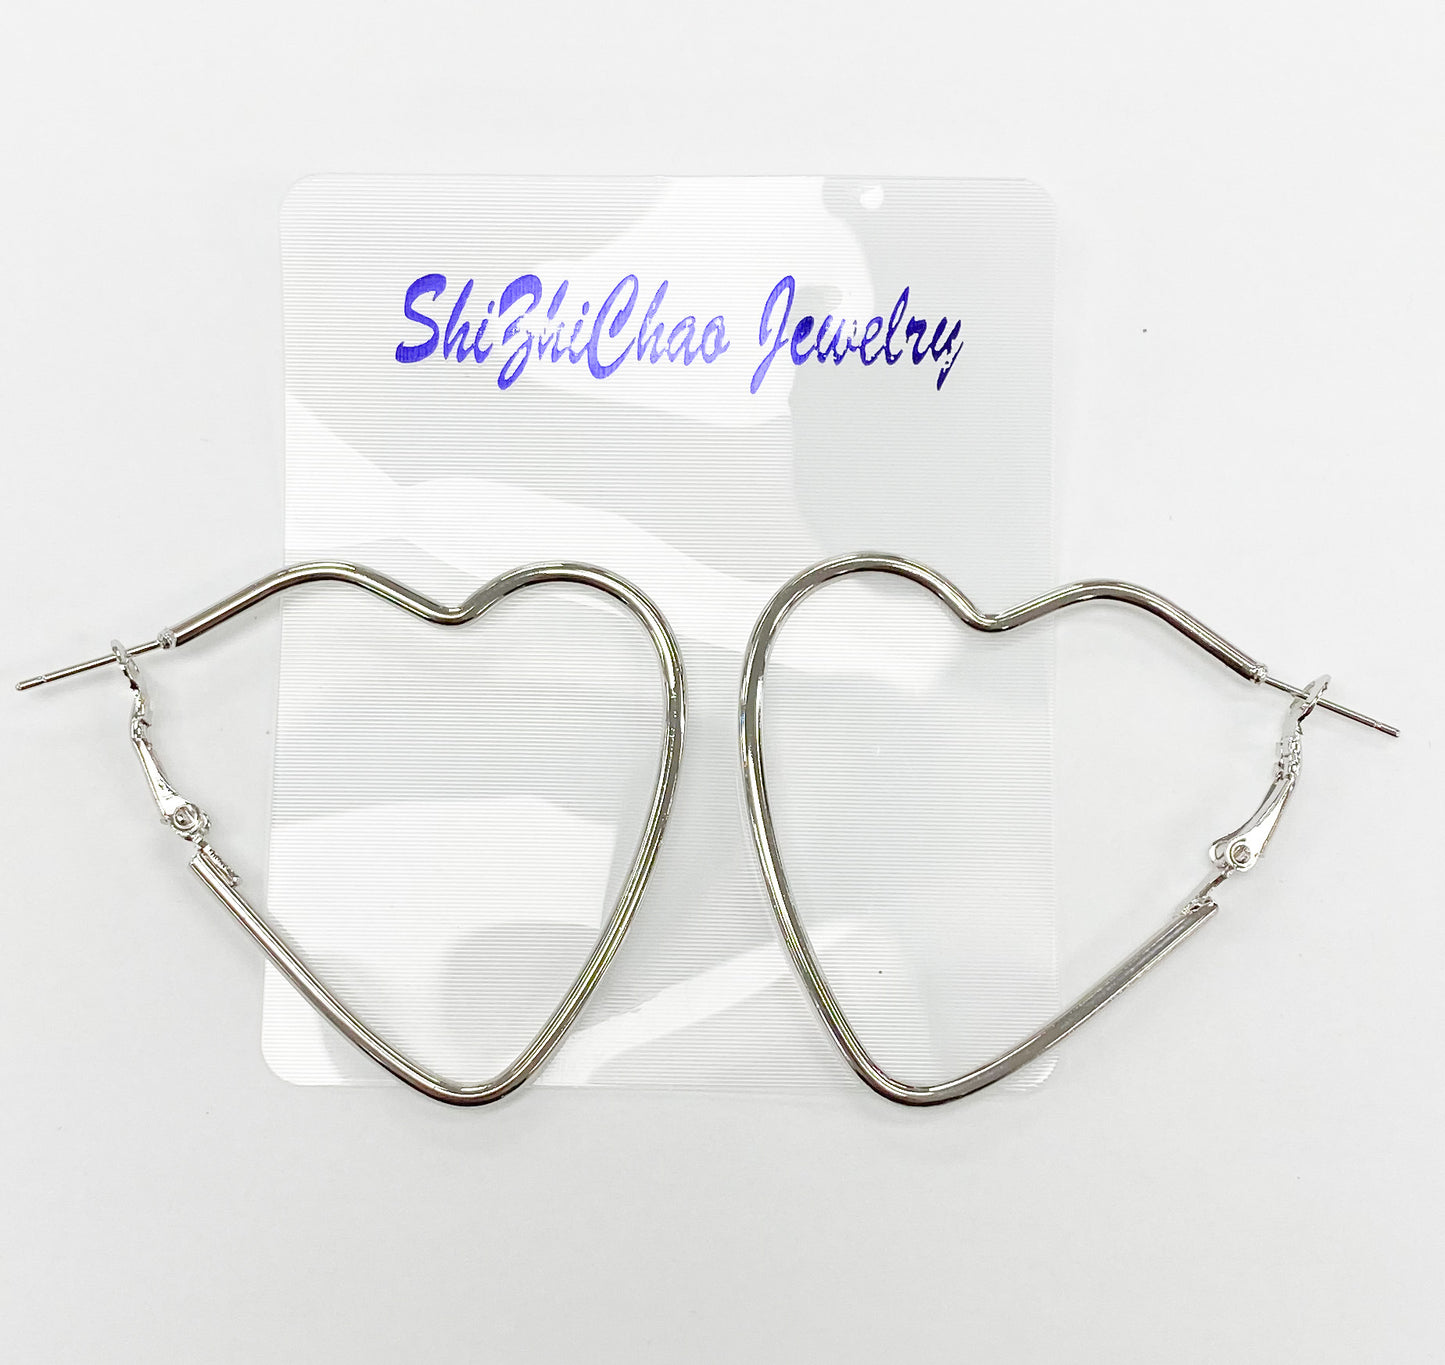 60mm x 55mm Silver Heart Shaped Earring For Beading Around 2mm Thickness